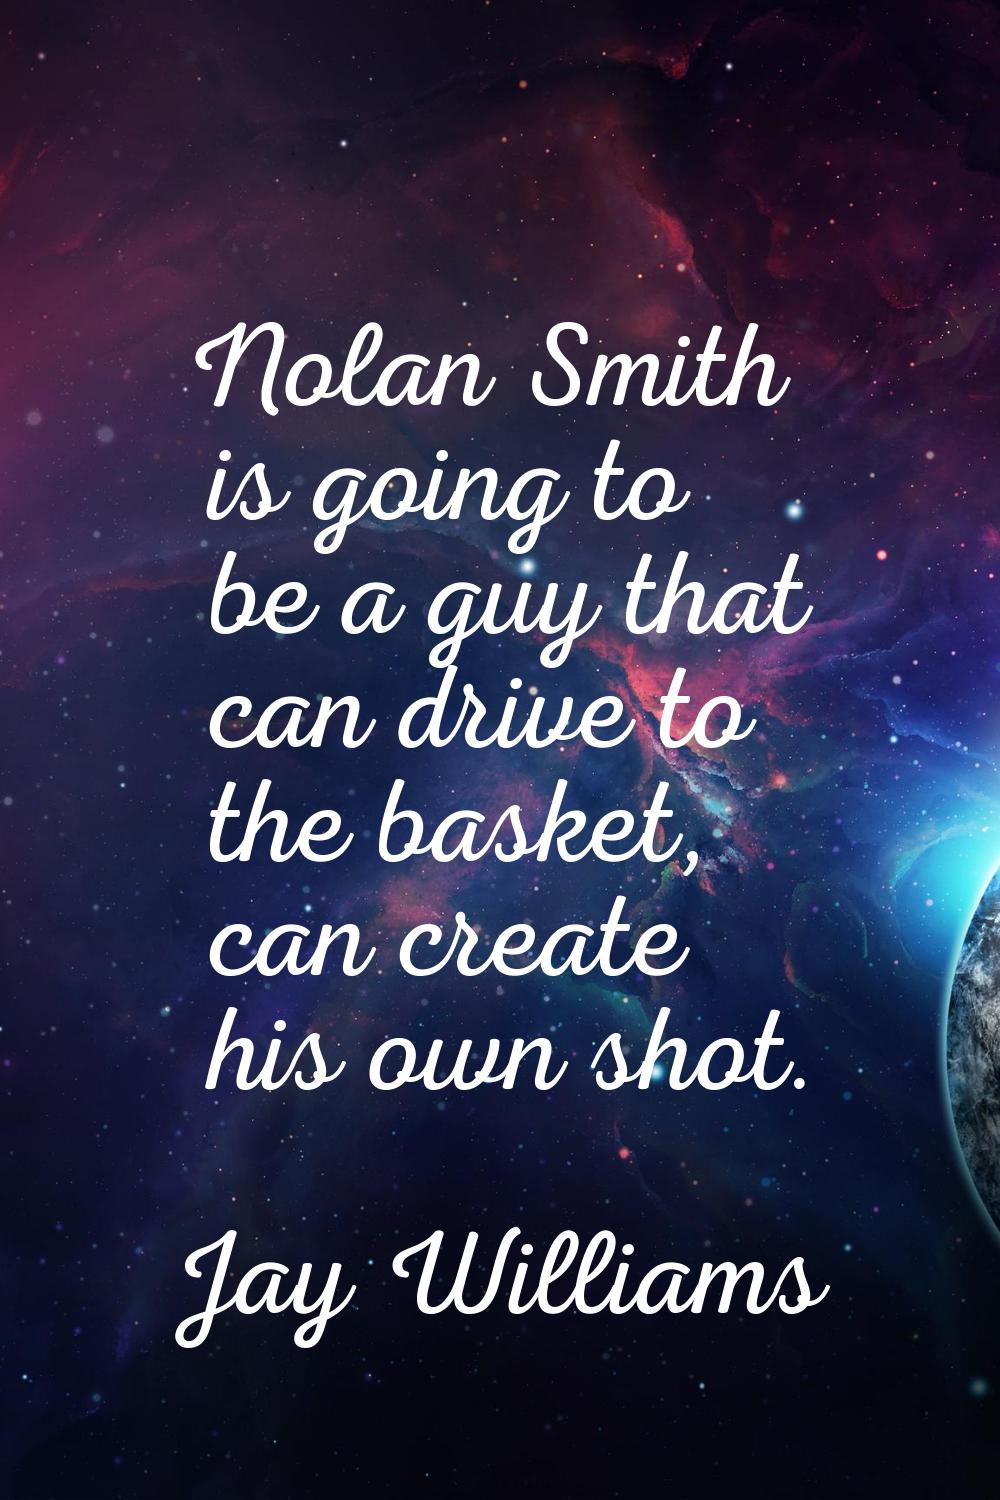 Nolan Smith is going to be a guy that can drive to the basket, can create his own shot.